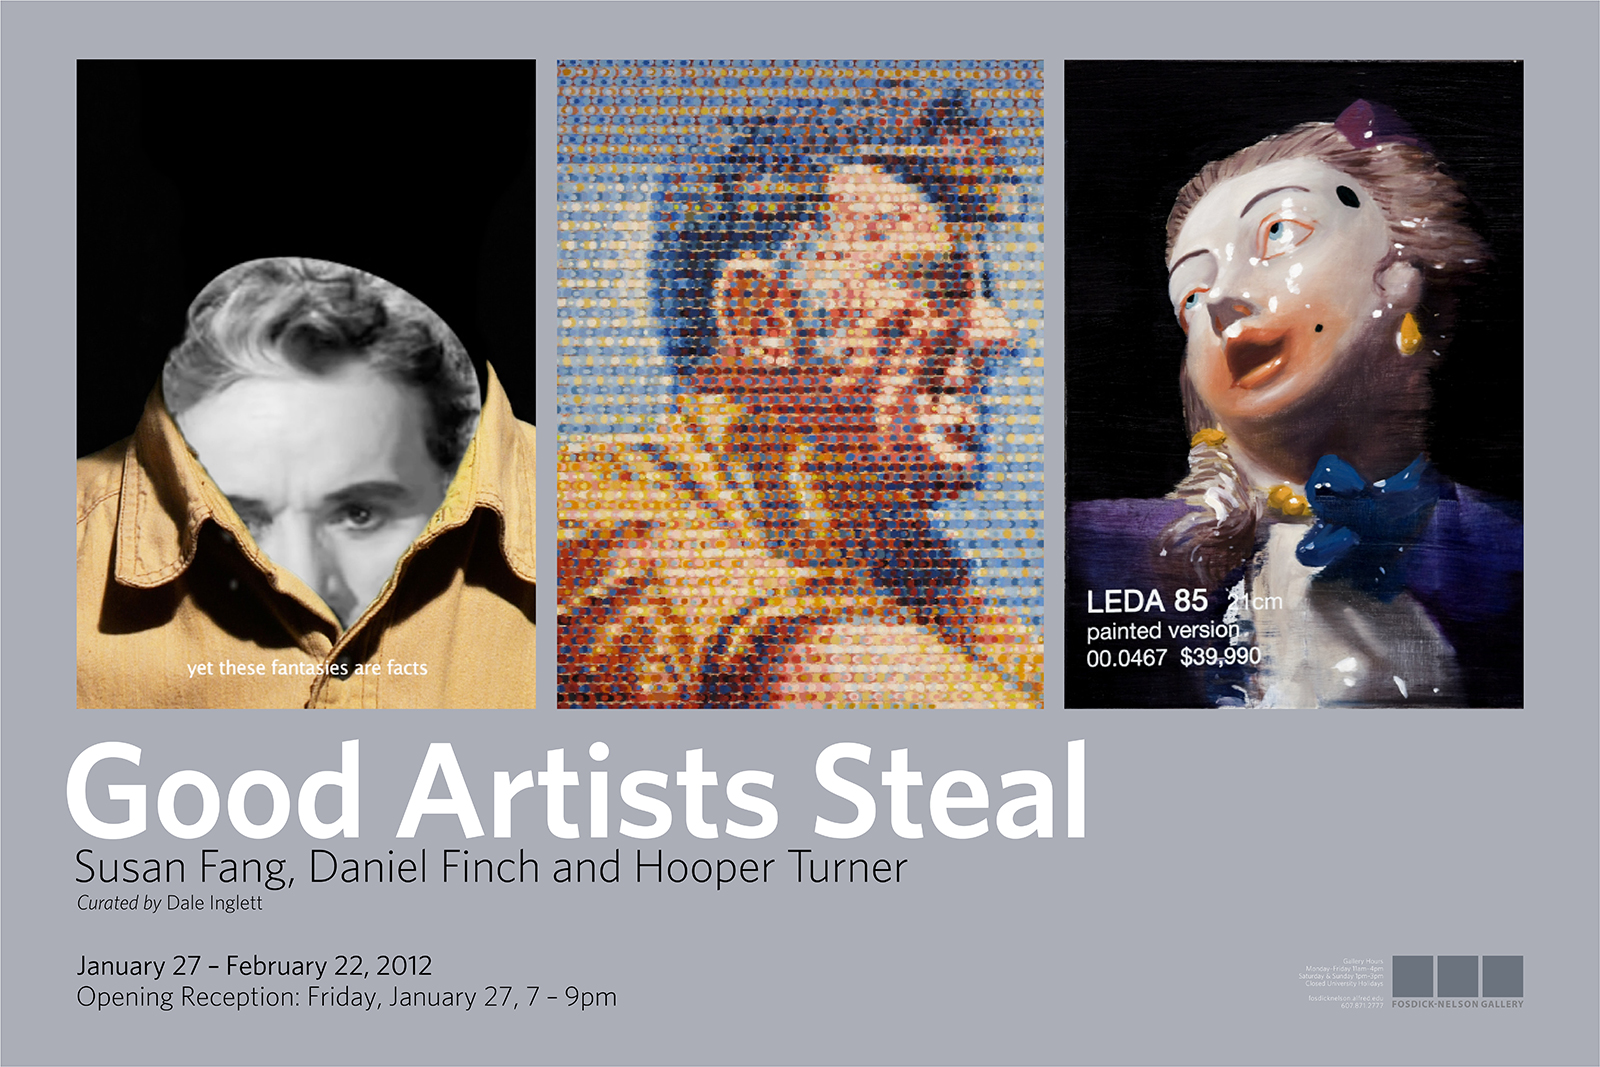 Good Artists Steal exhibition poster